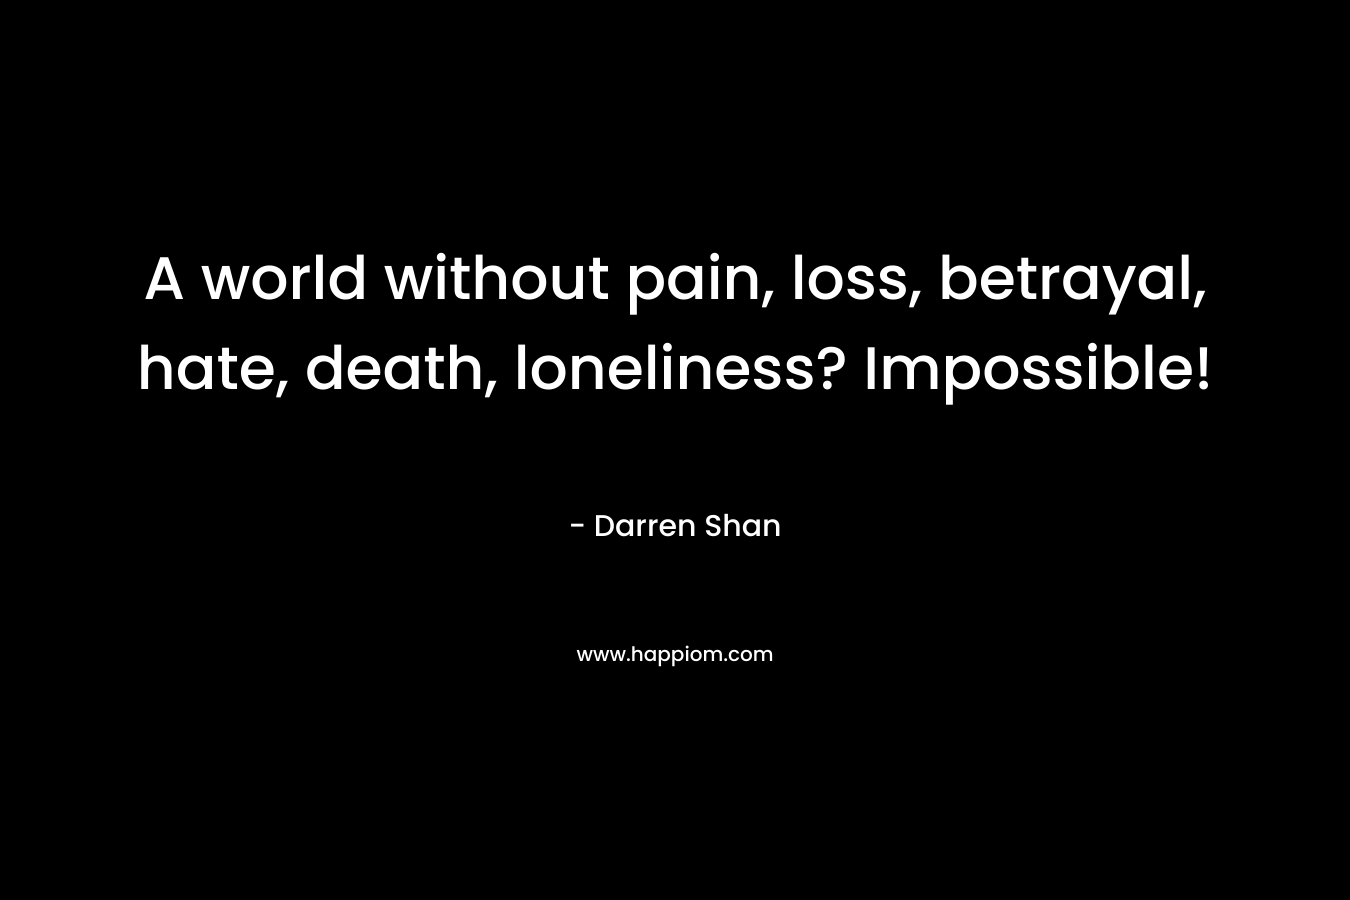 A world without pain, loss, betrayal, hate, death, loneliness? Impossible!